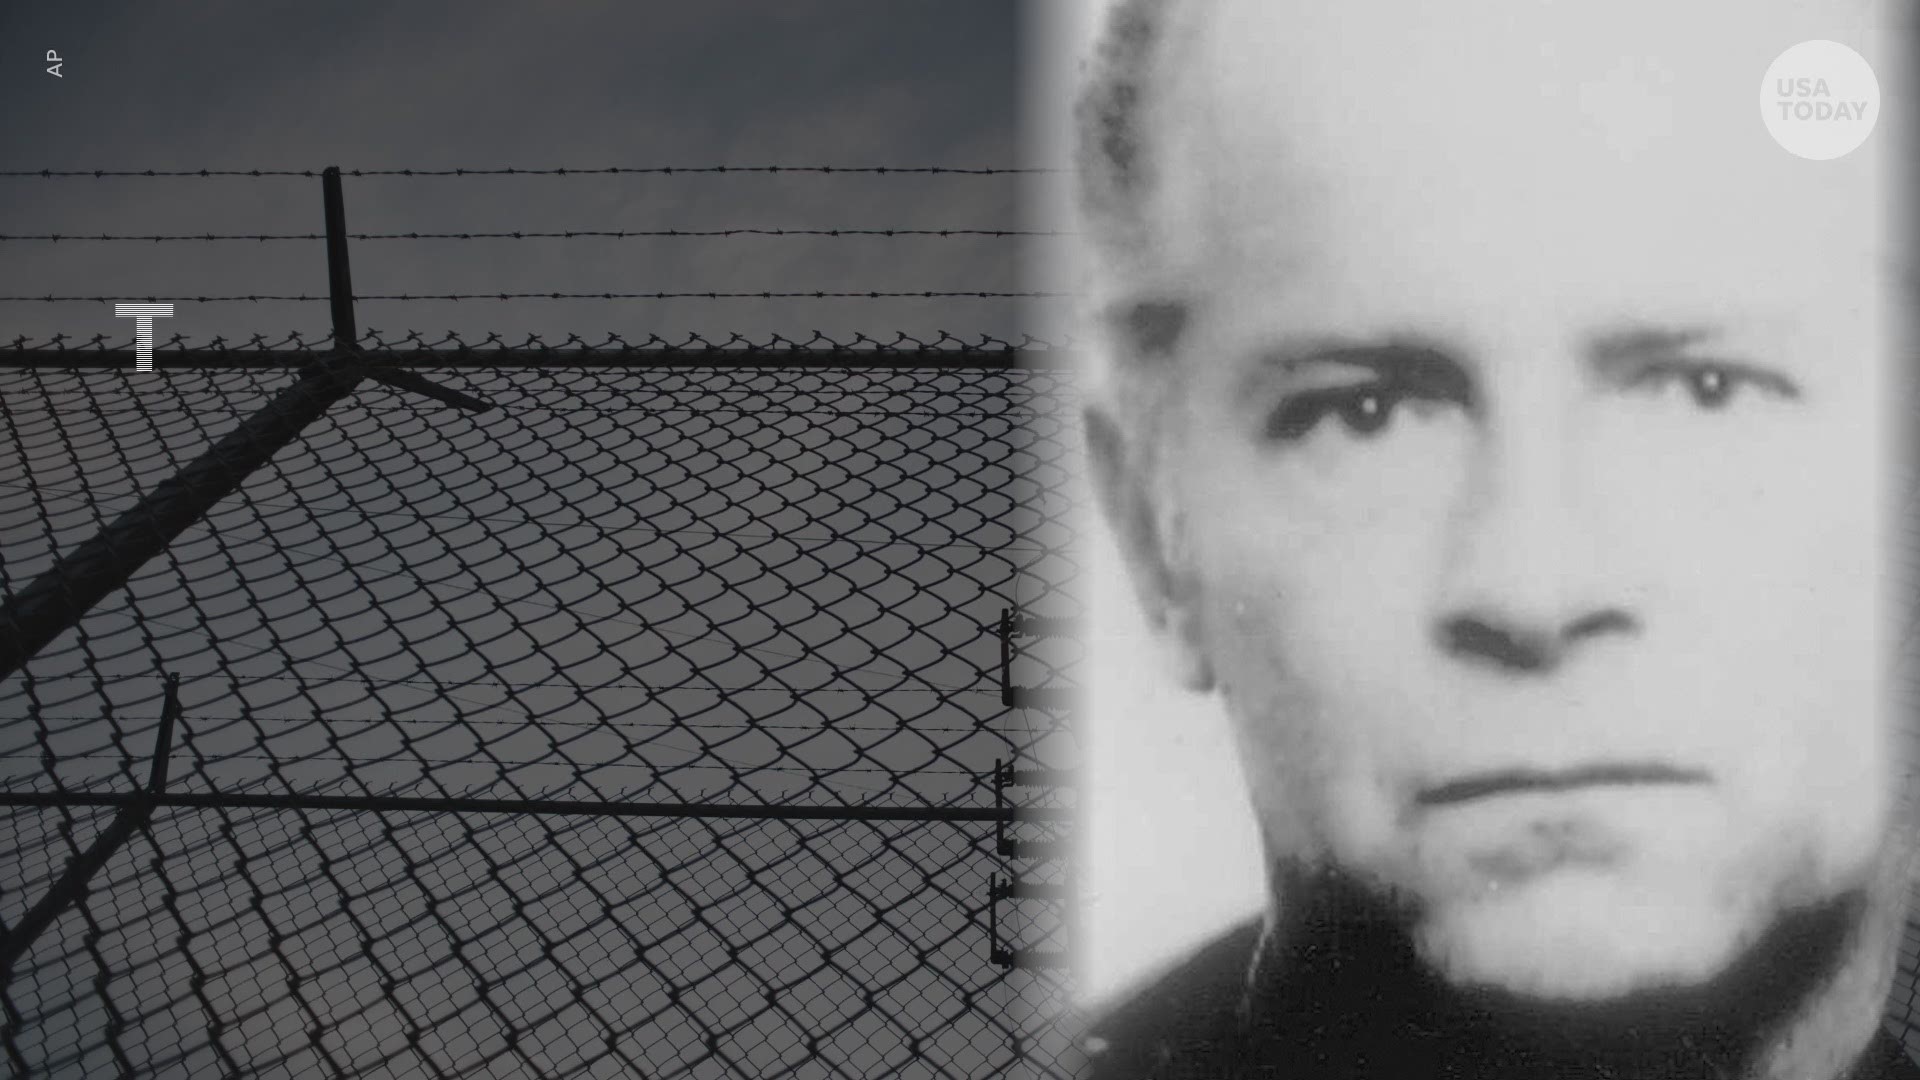 Notorious Boston crime boss James "Whitey" Bulger was found dead in prison. He eluded authorities for 16 years before being captured. USA TODAY